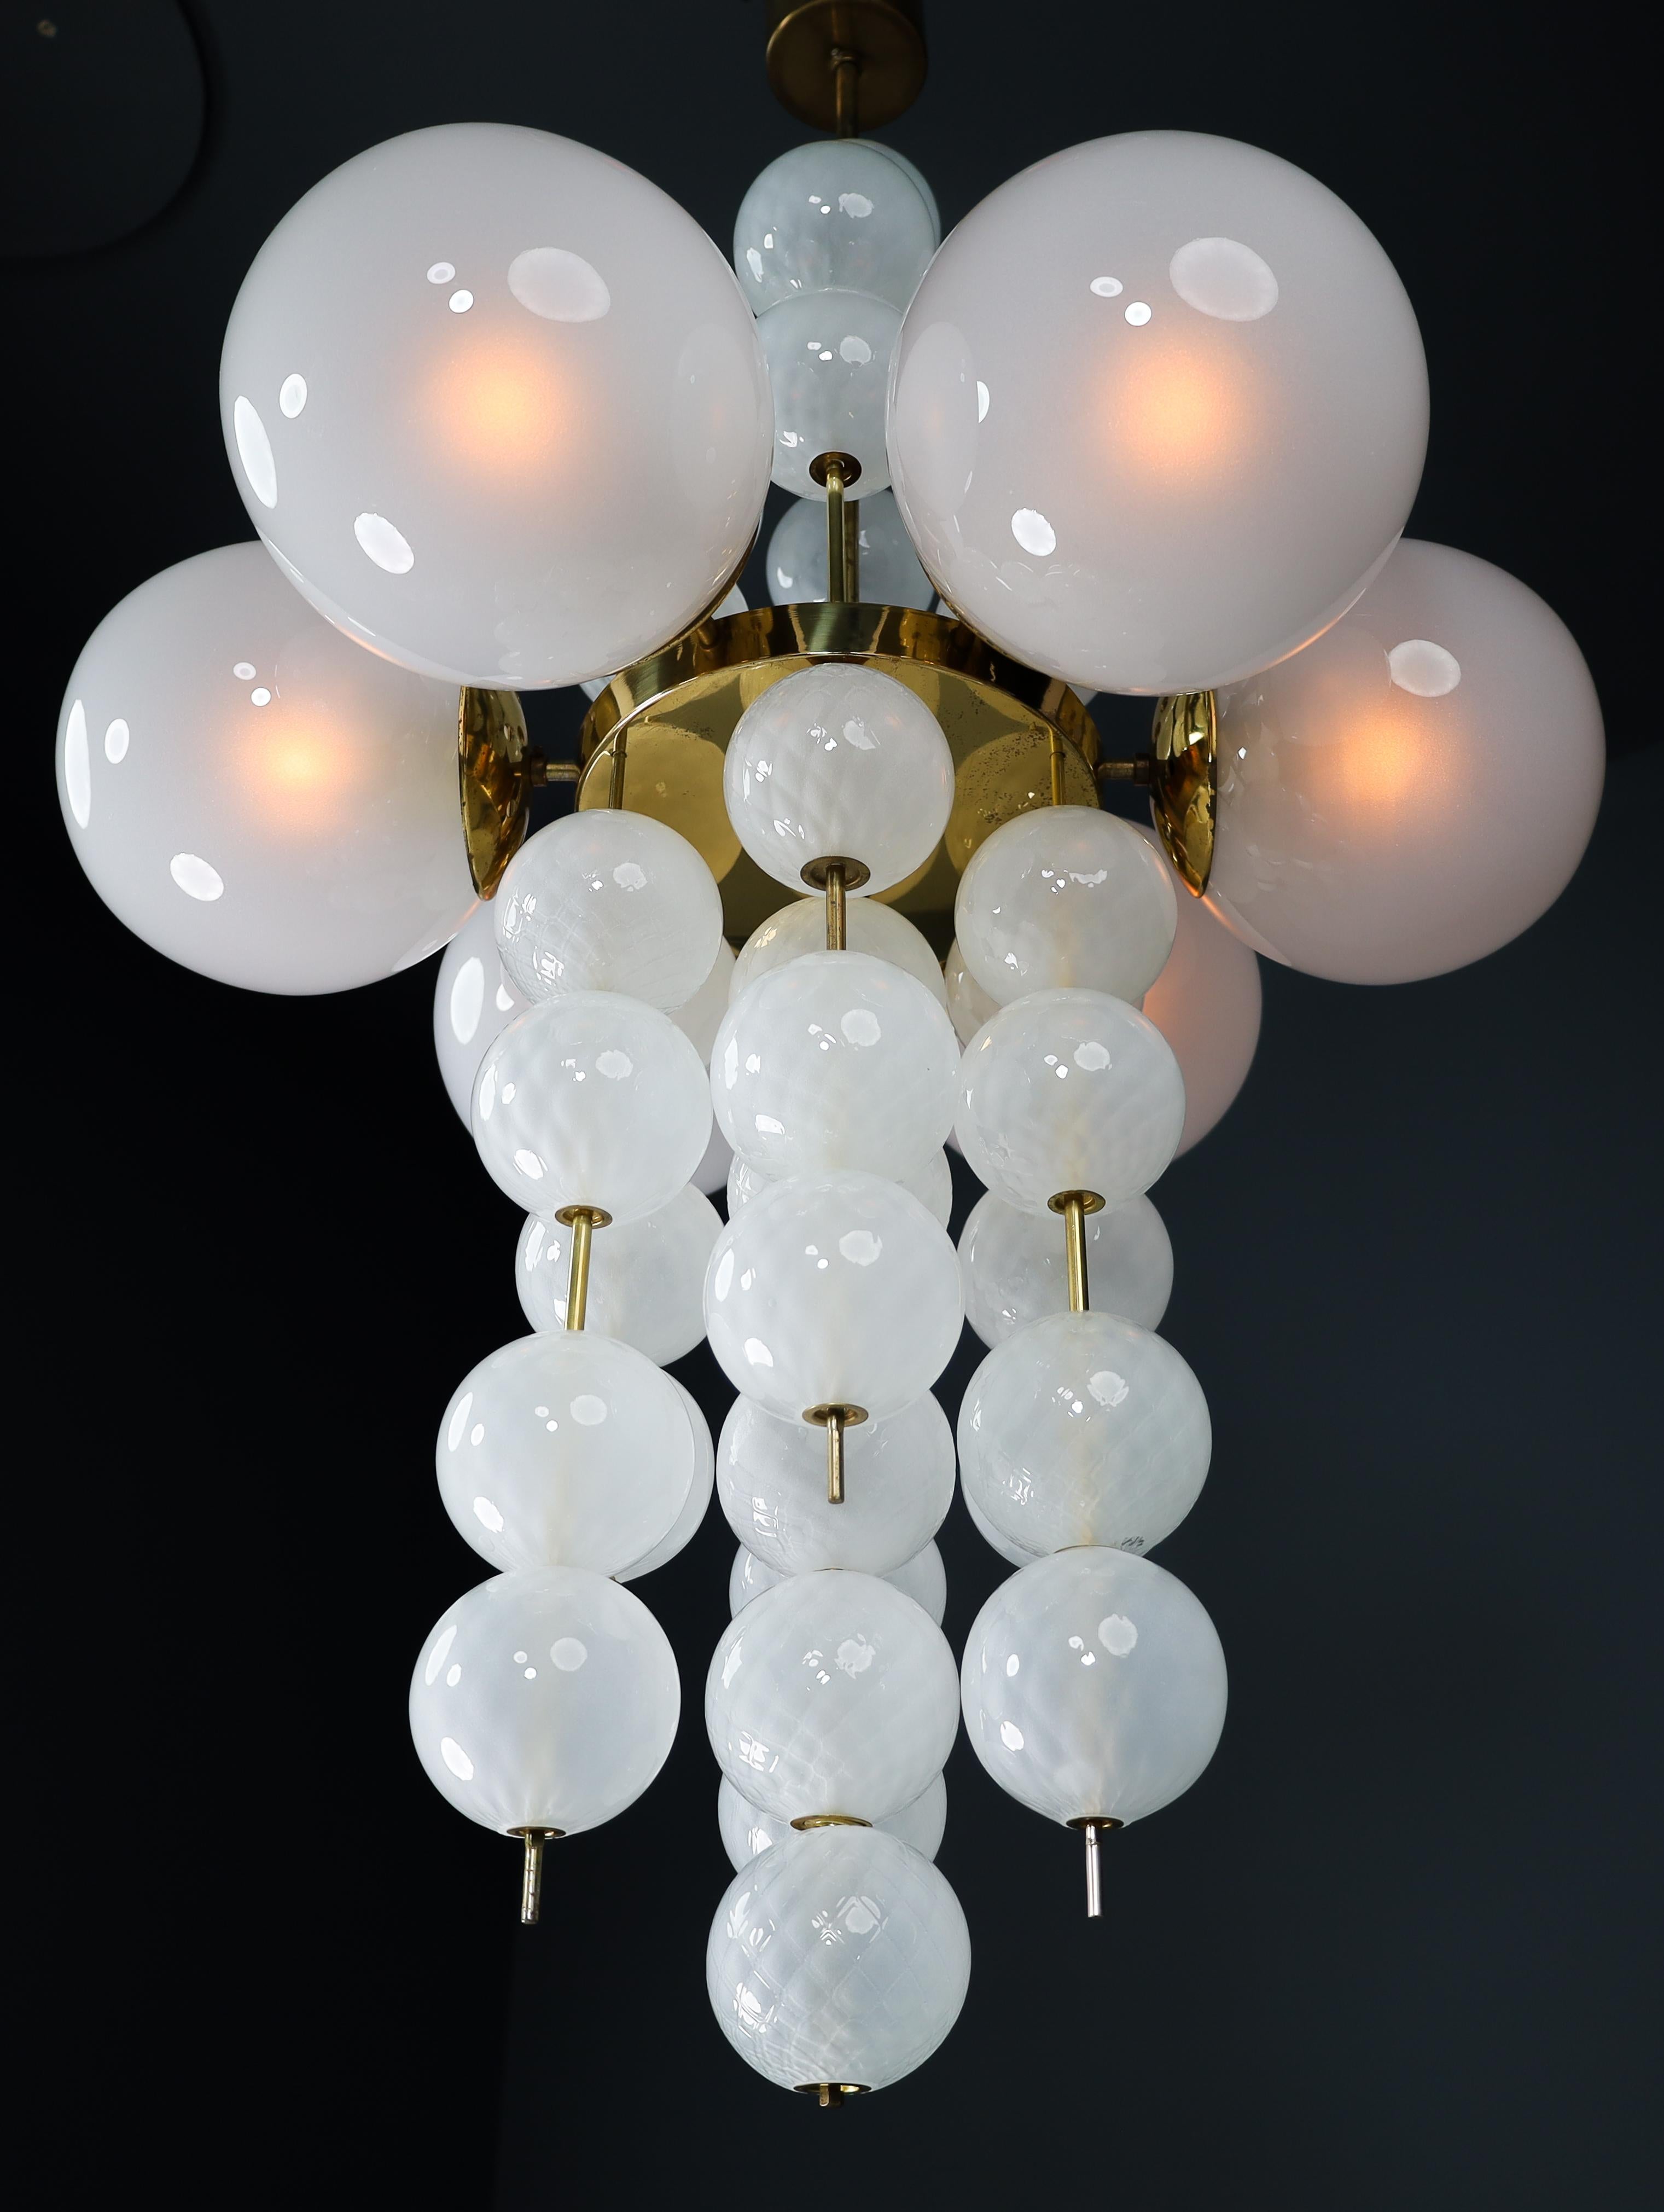 Czech XL Hotel Chandelier with Brass Fixture and Hand-Blowed Frosted Glass Globes For Sale